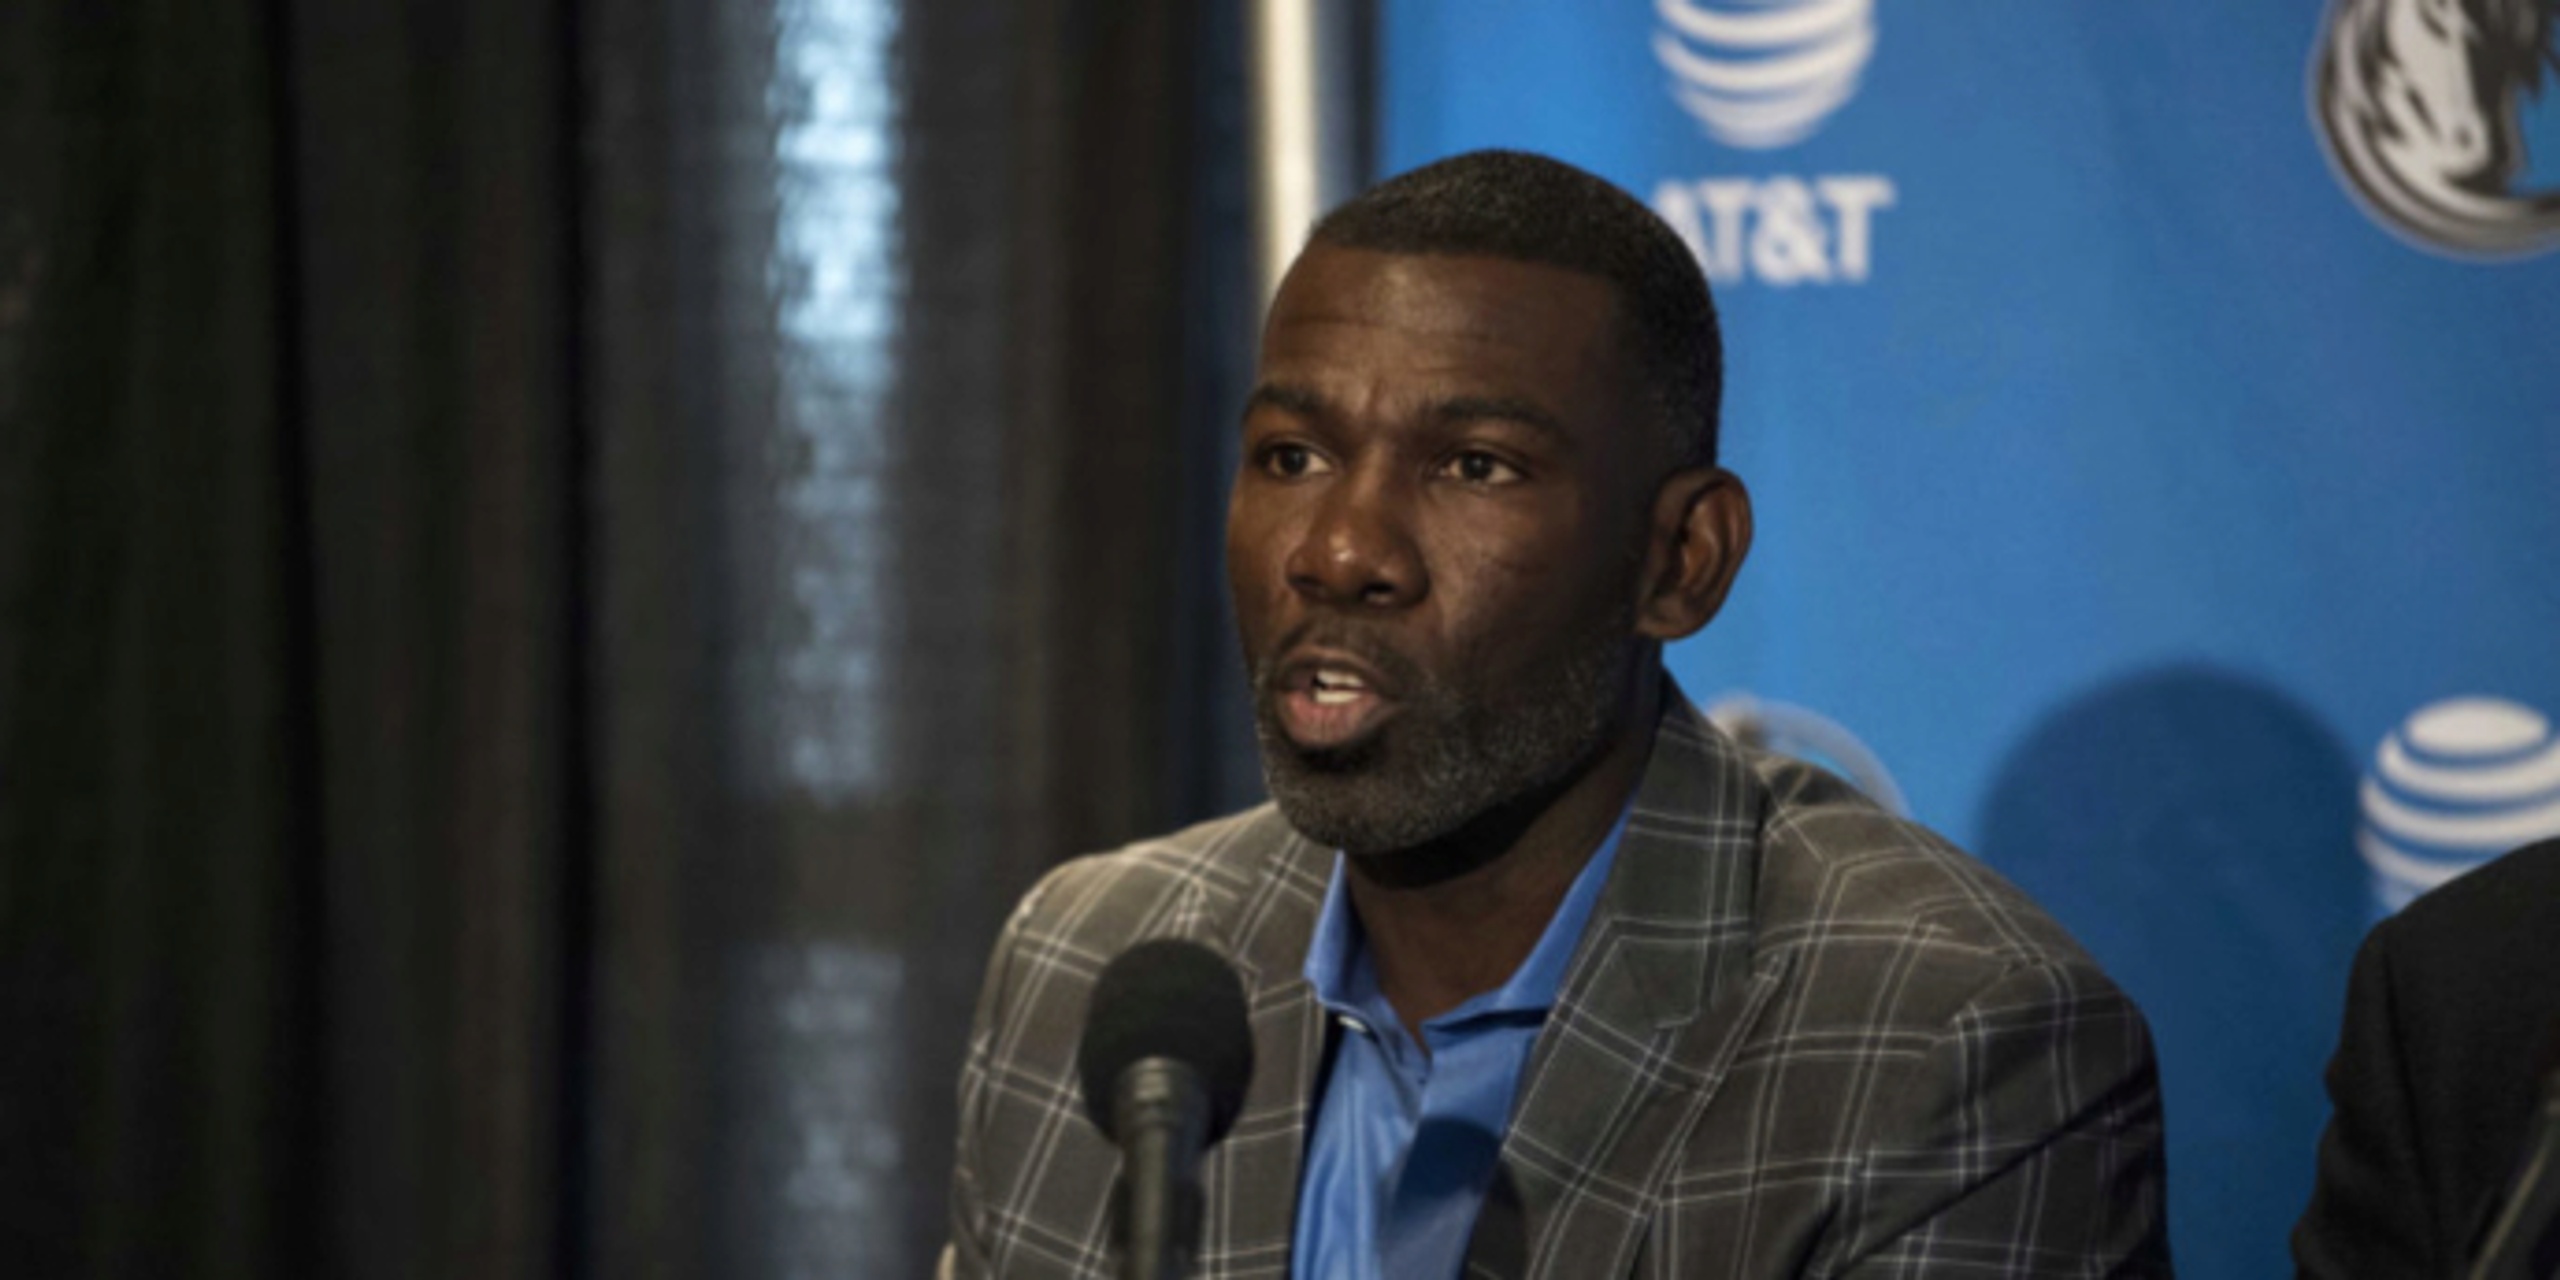 Michael Finley emerges as candidate for Mavericks' GM